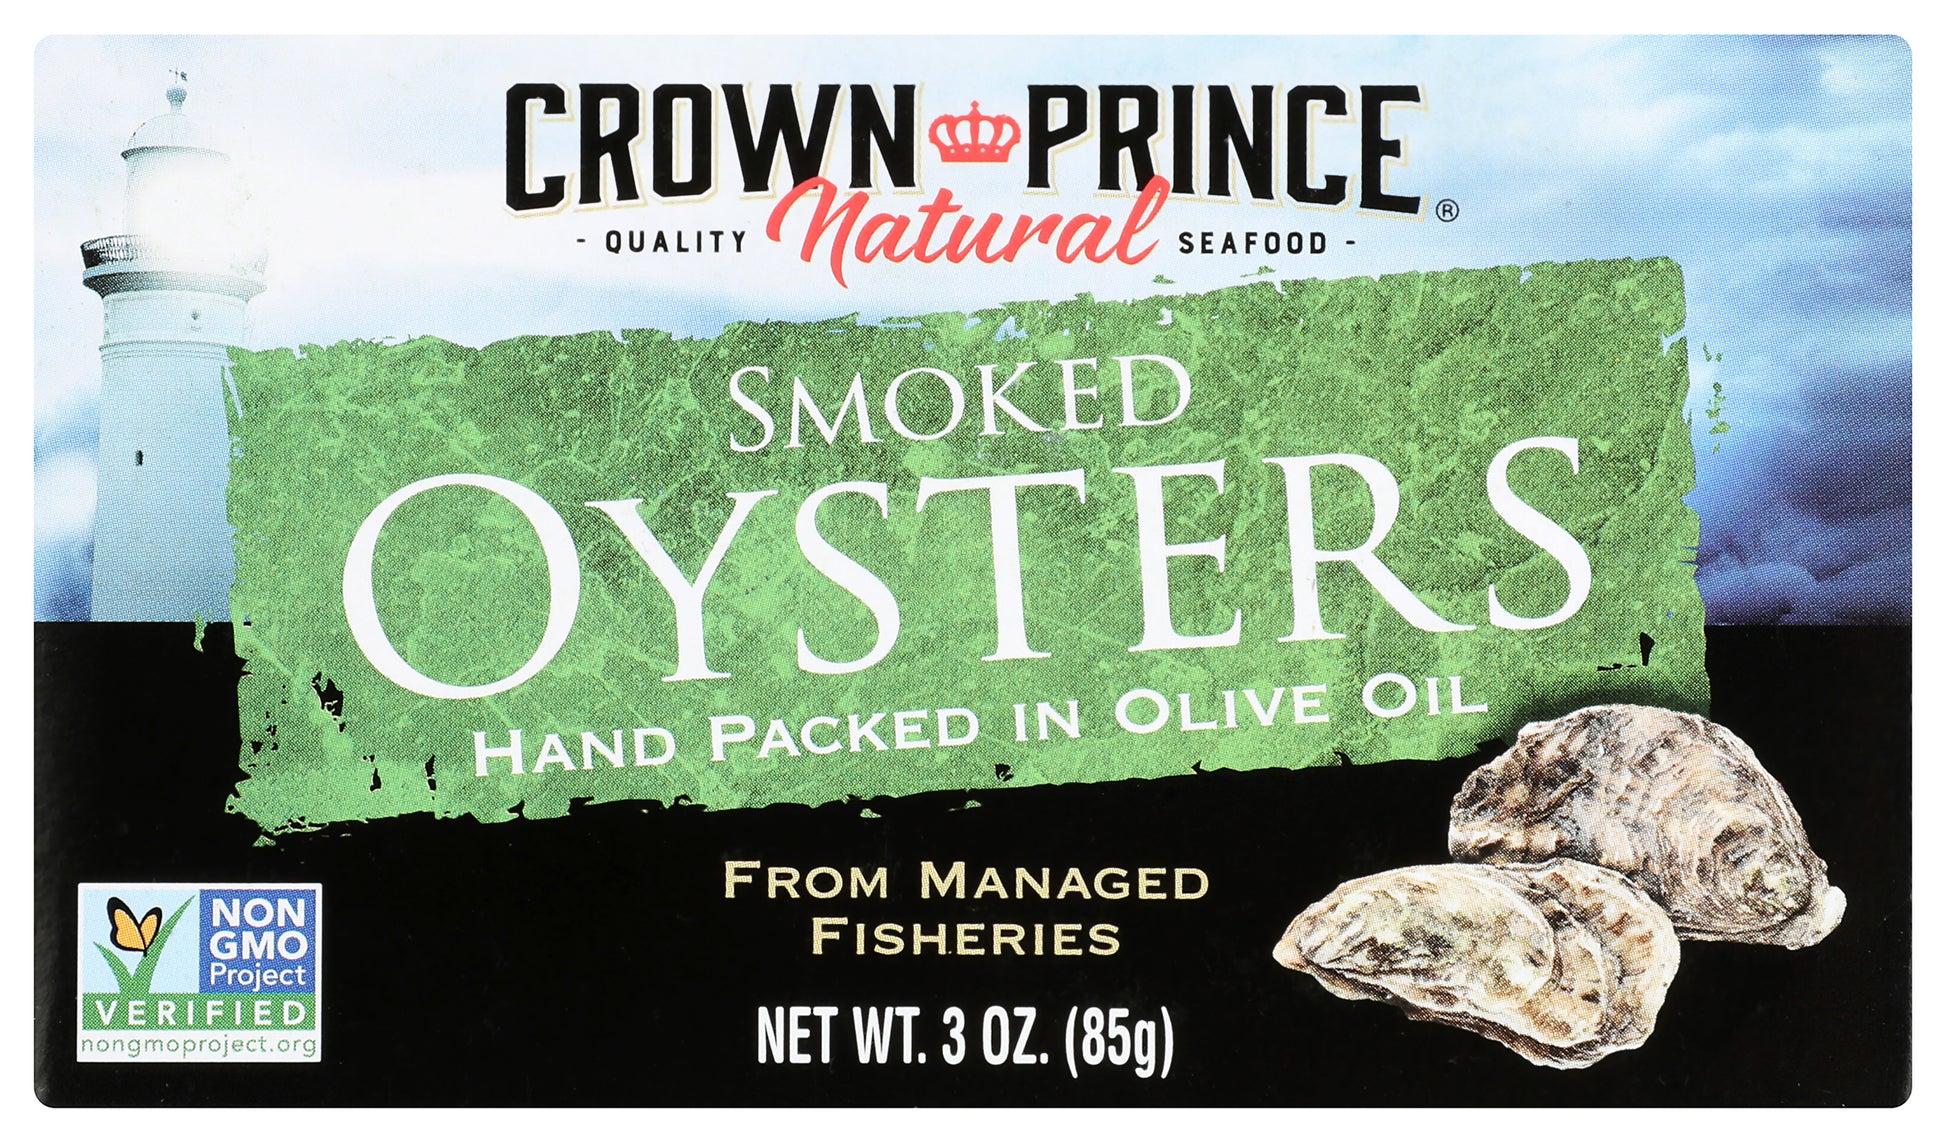 Crown Prince Smoked Oysters in Olive Oil 3 oz